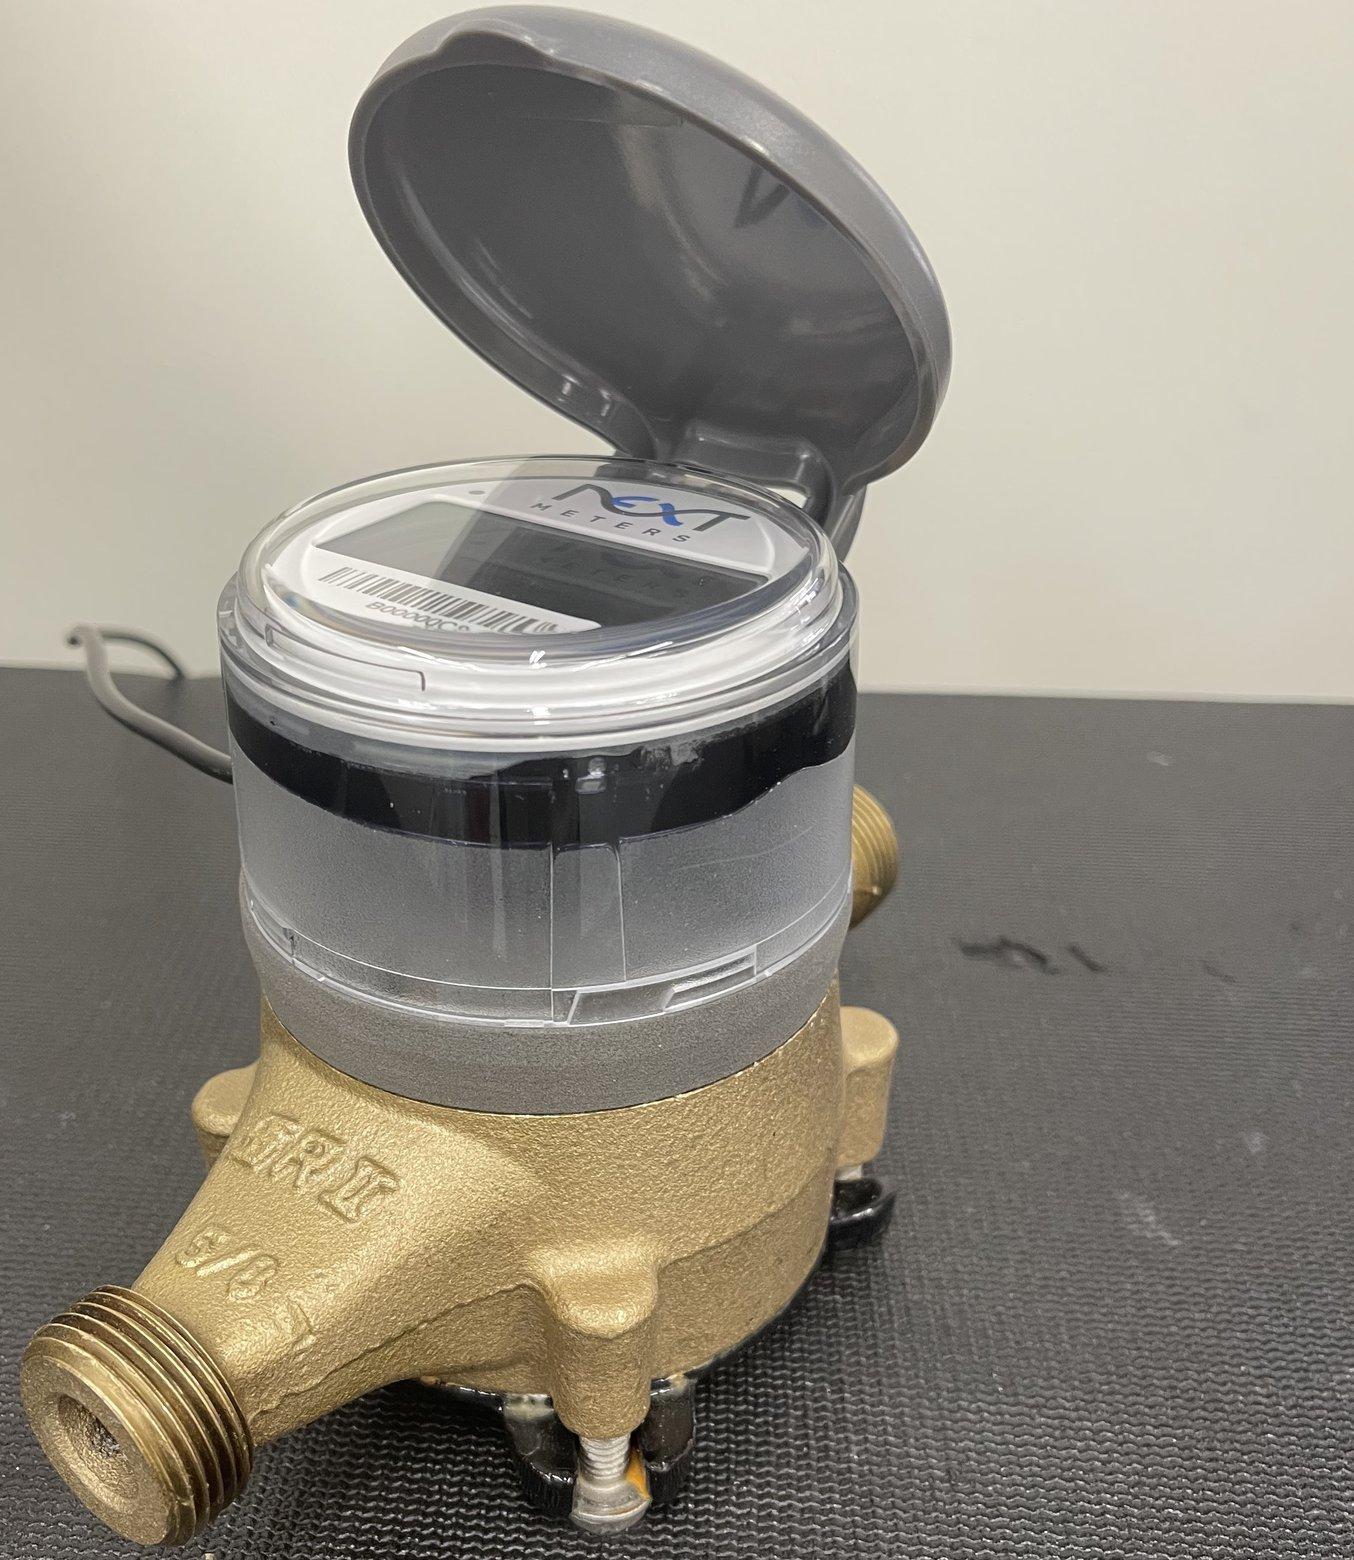 A water meter (clear casing) fitted onto a unique water system spigot (gold plated) via a custom-printed Fuse 1 SLS fixture (grey middle part).